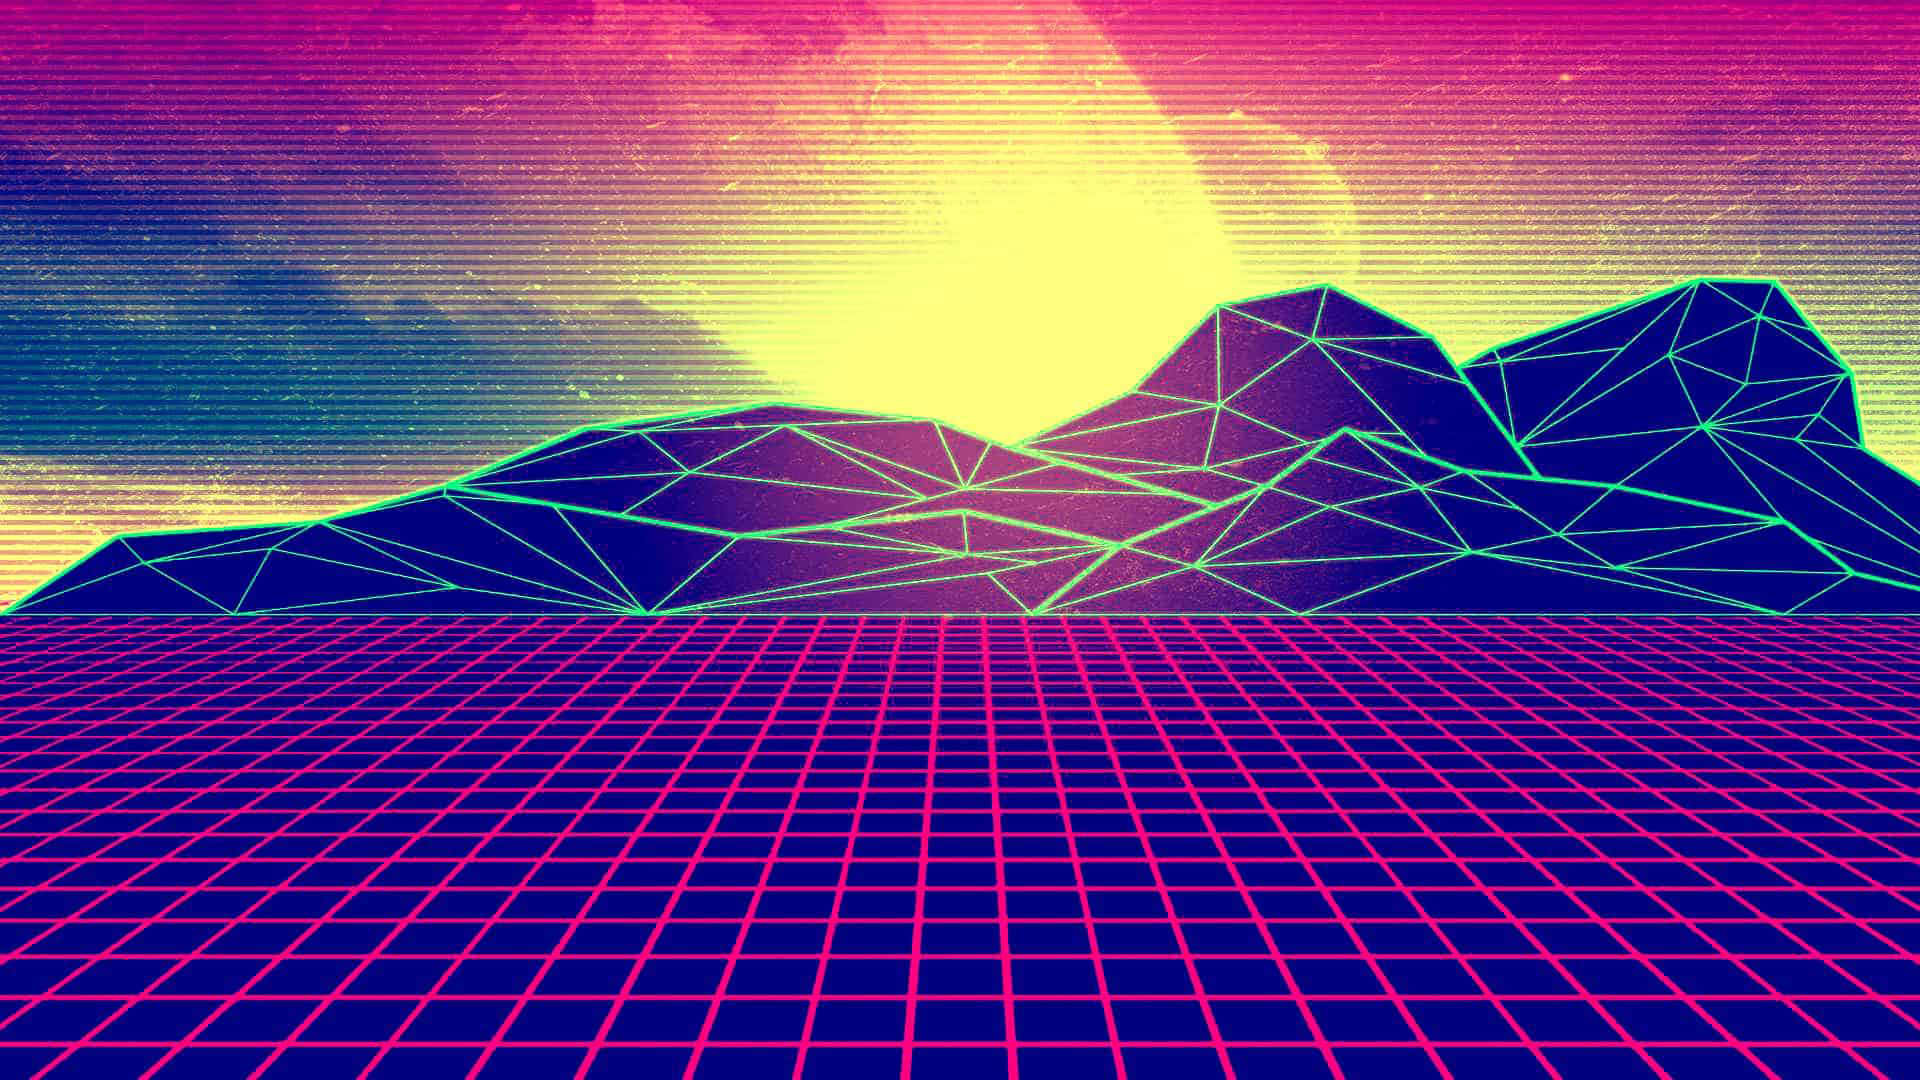 Feel the futuristic vibes, behold the power of Vaporwave.